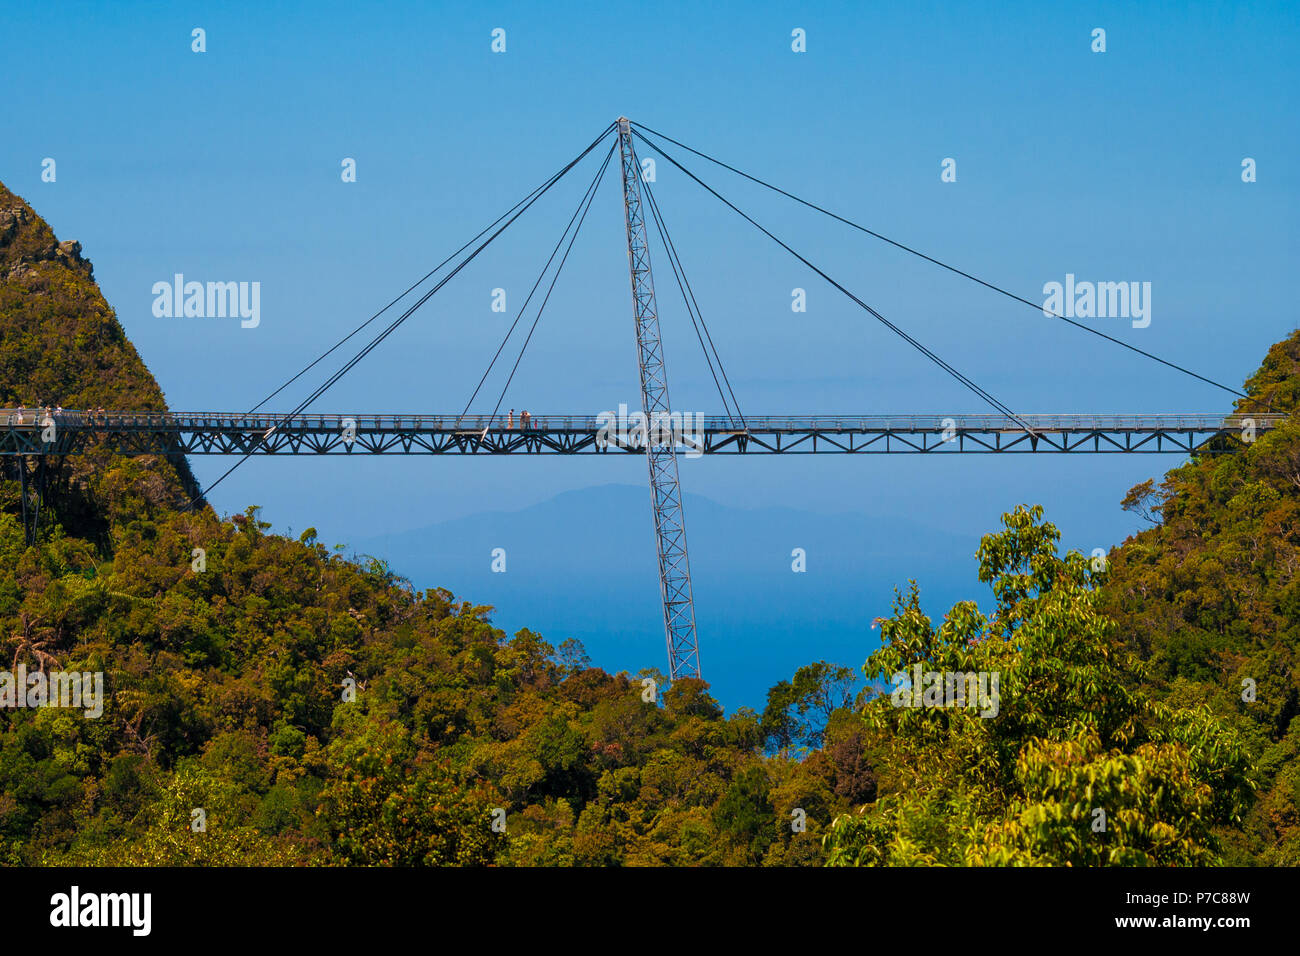 Side view of the amazing Langkawi Sky Bridge, a curved pedestrian cable-stayed bridge, suspended by cables from a single pylon, connecting two hilltop Stock Photo